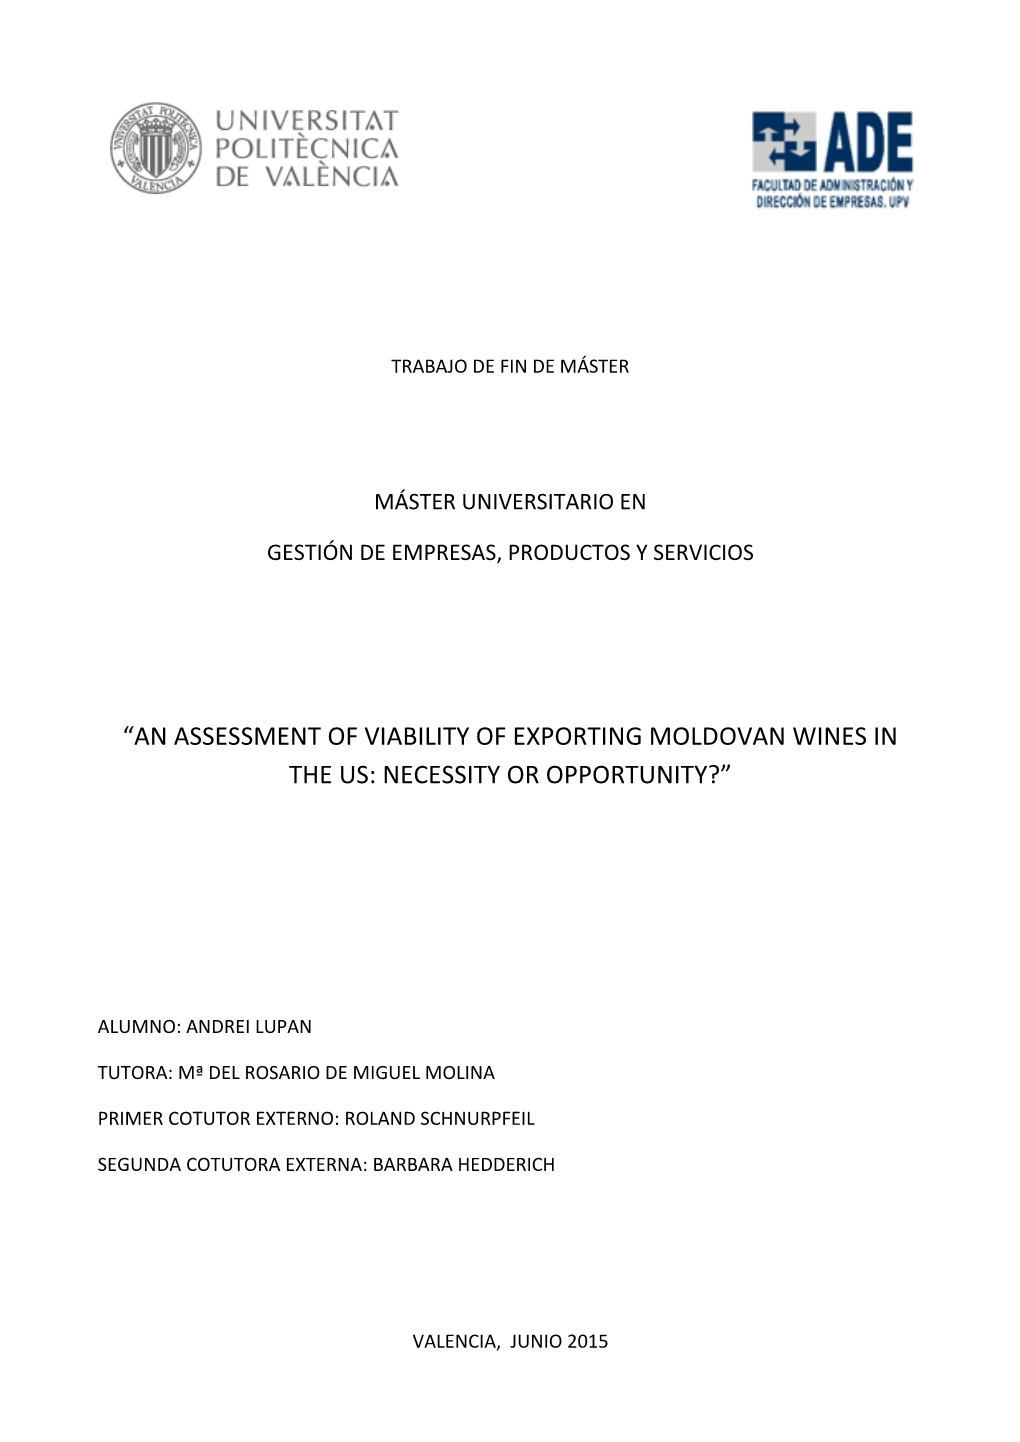 An Assessment of Viability of Exporting Moldovan Wines in the Us: Necessity Or Opportunity?”